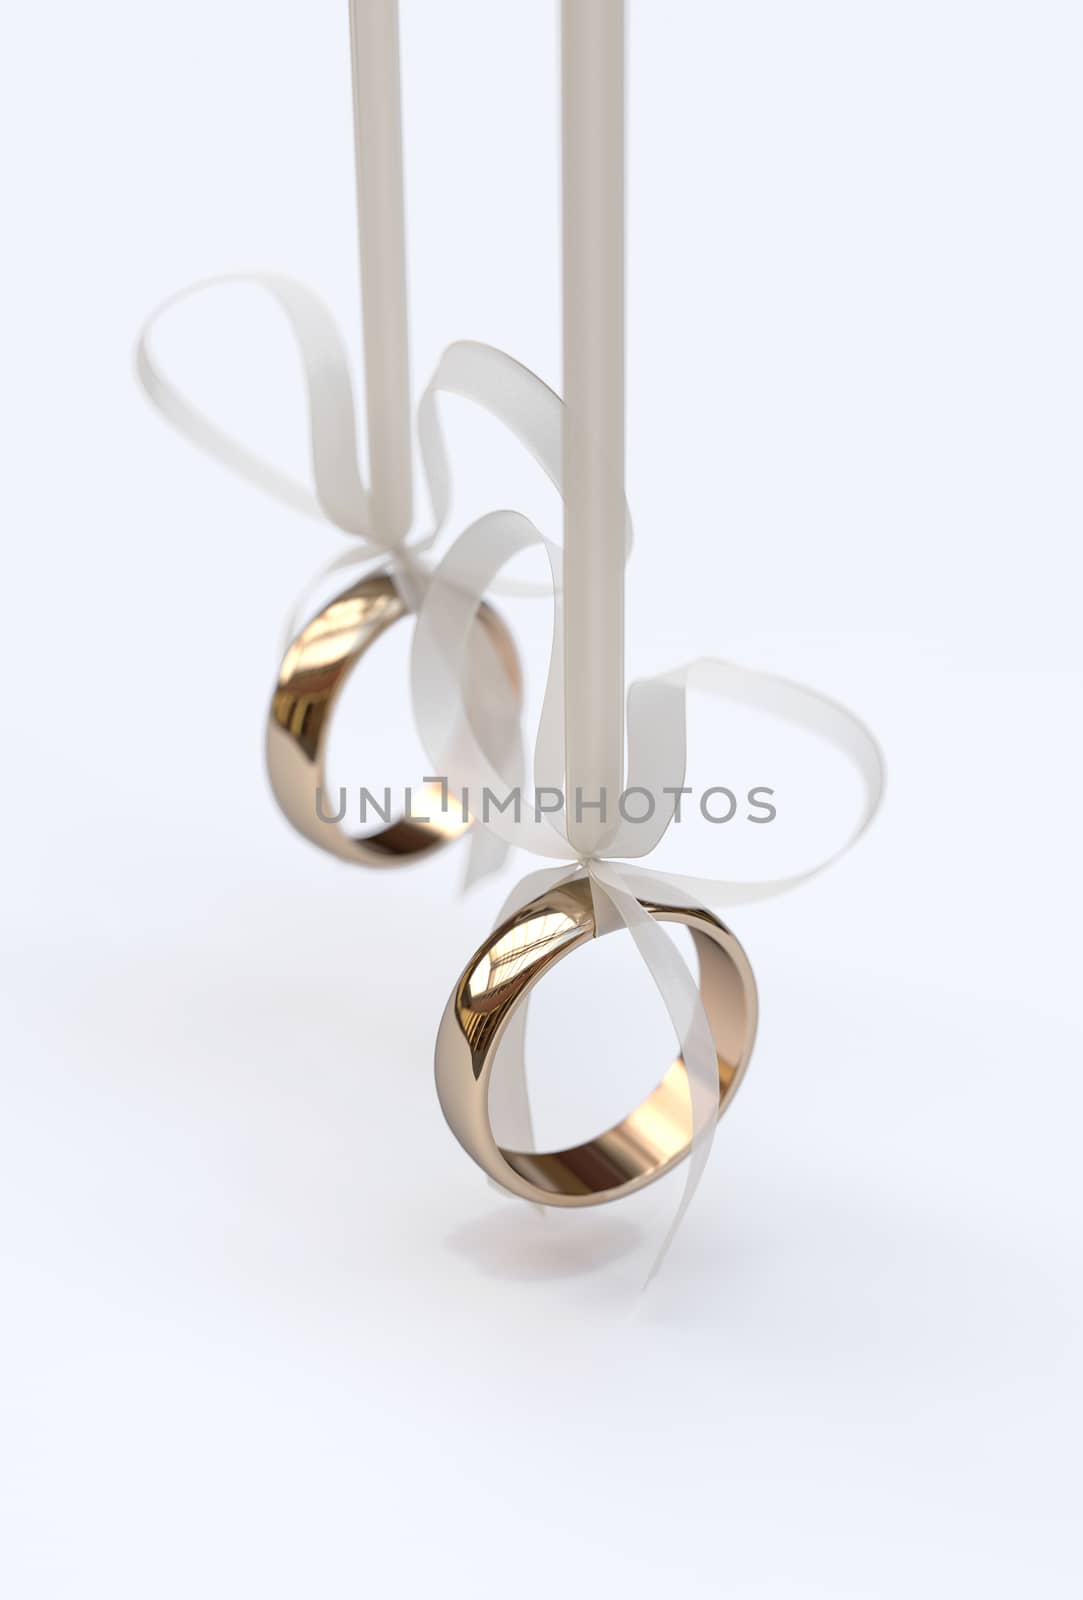 Couple of gold wedding rings with bows on white background